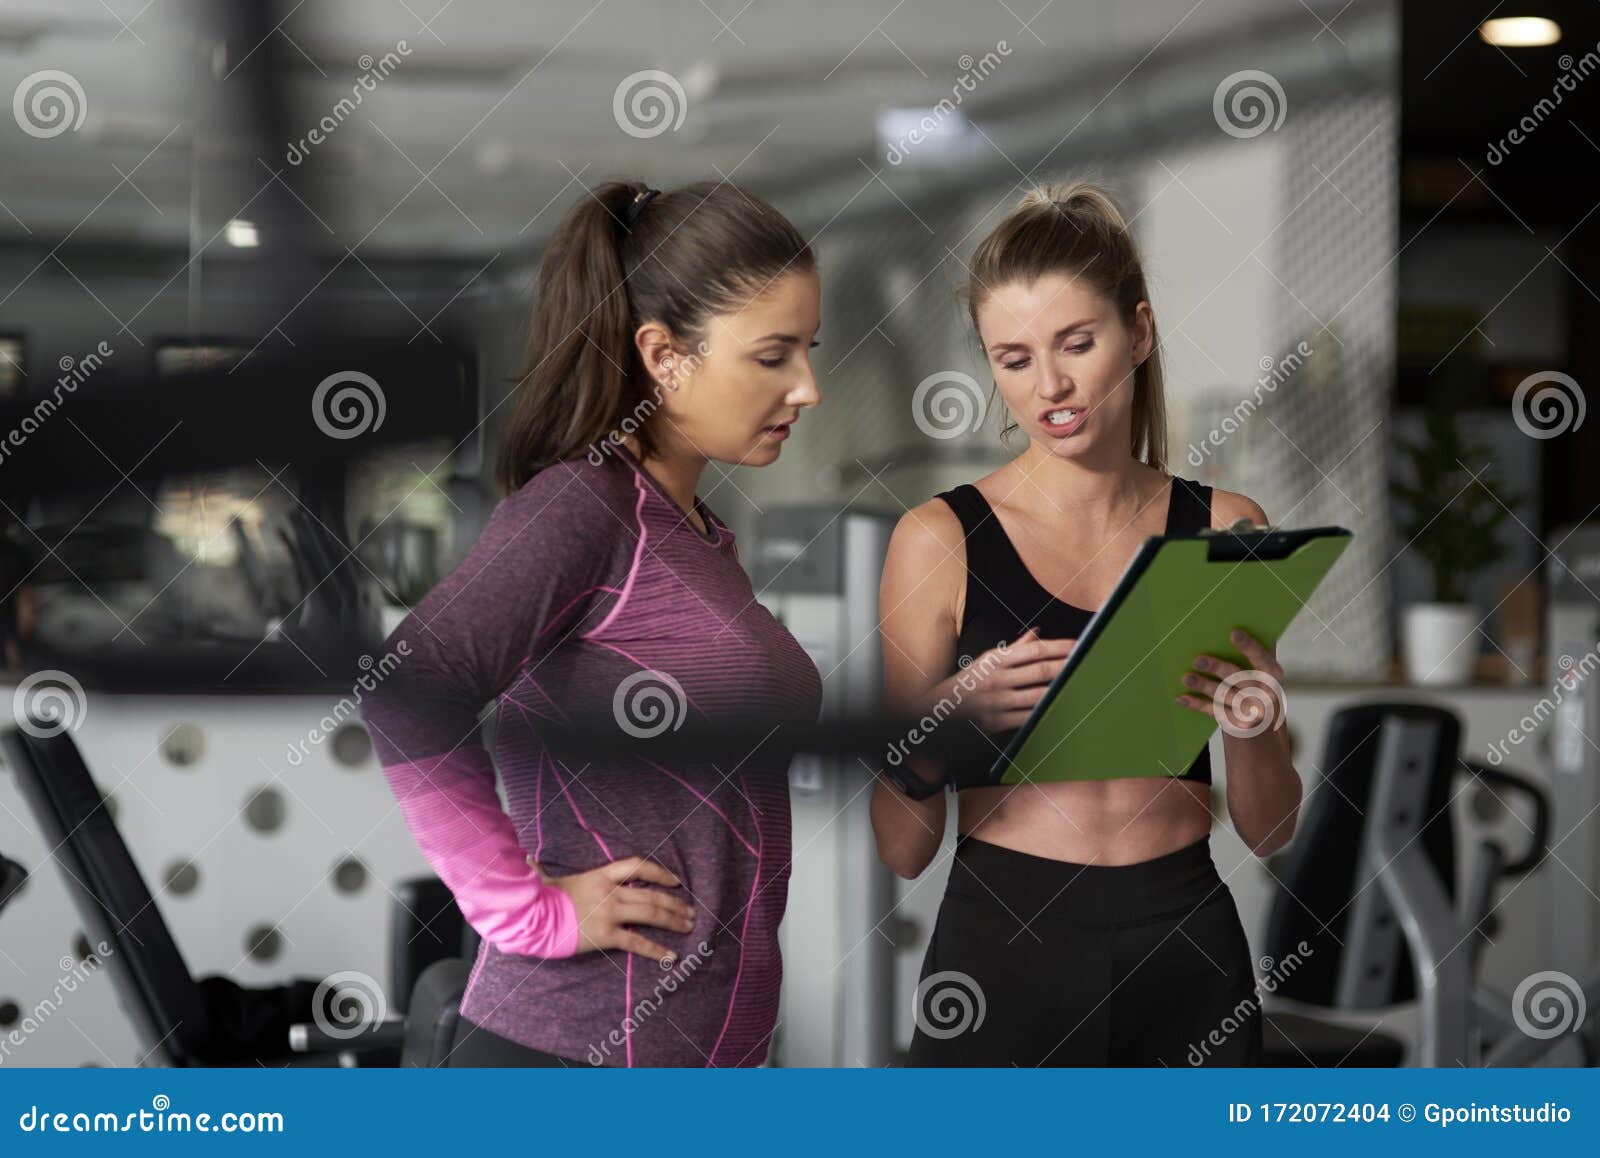 personal trainer guiding young woman